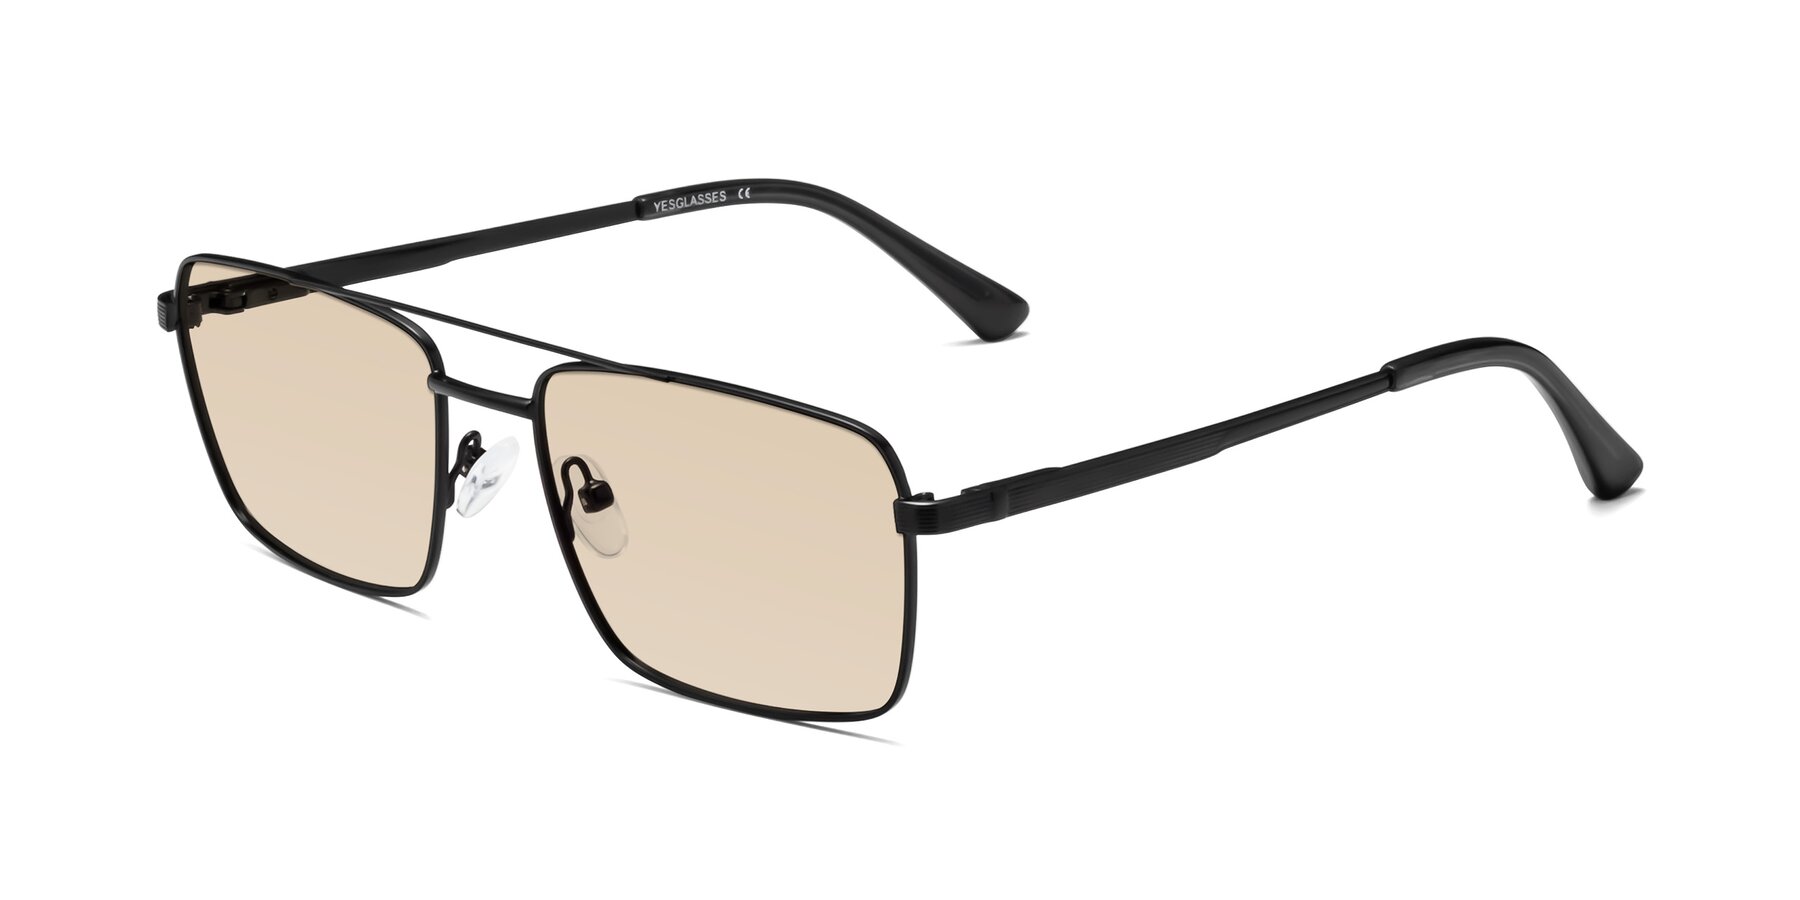 Angle of Beckum in Black with Light Brown Tinted Lenses